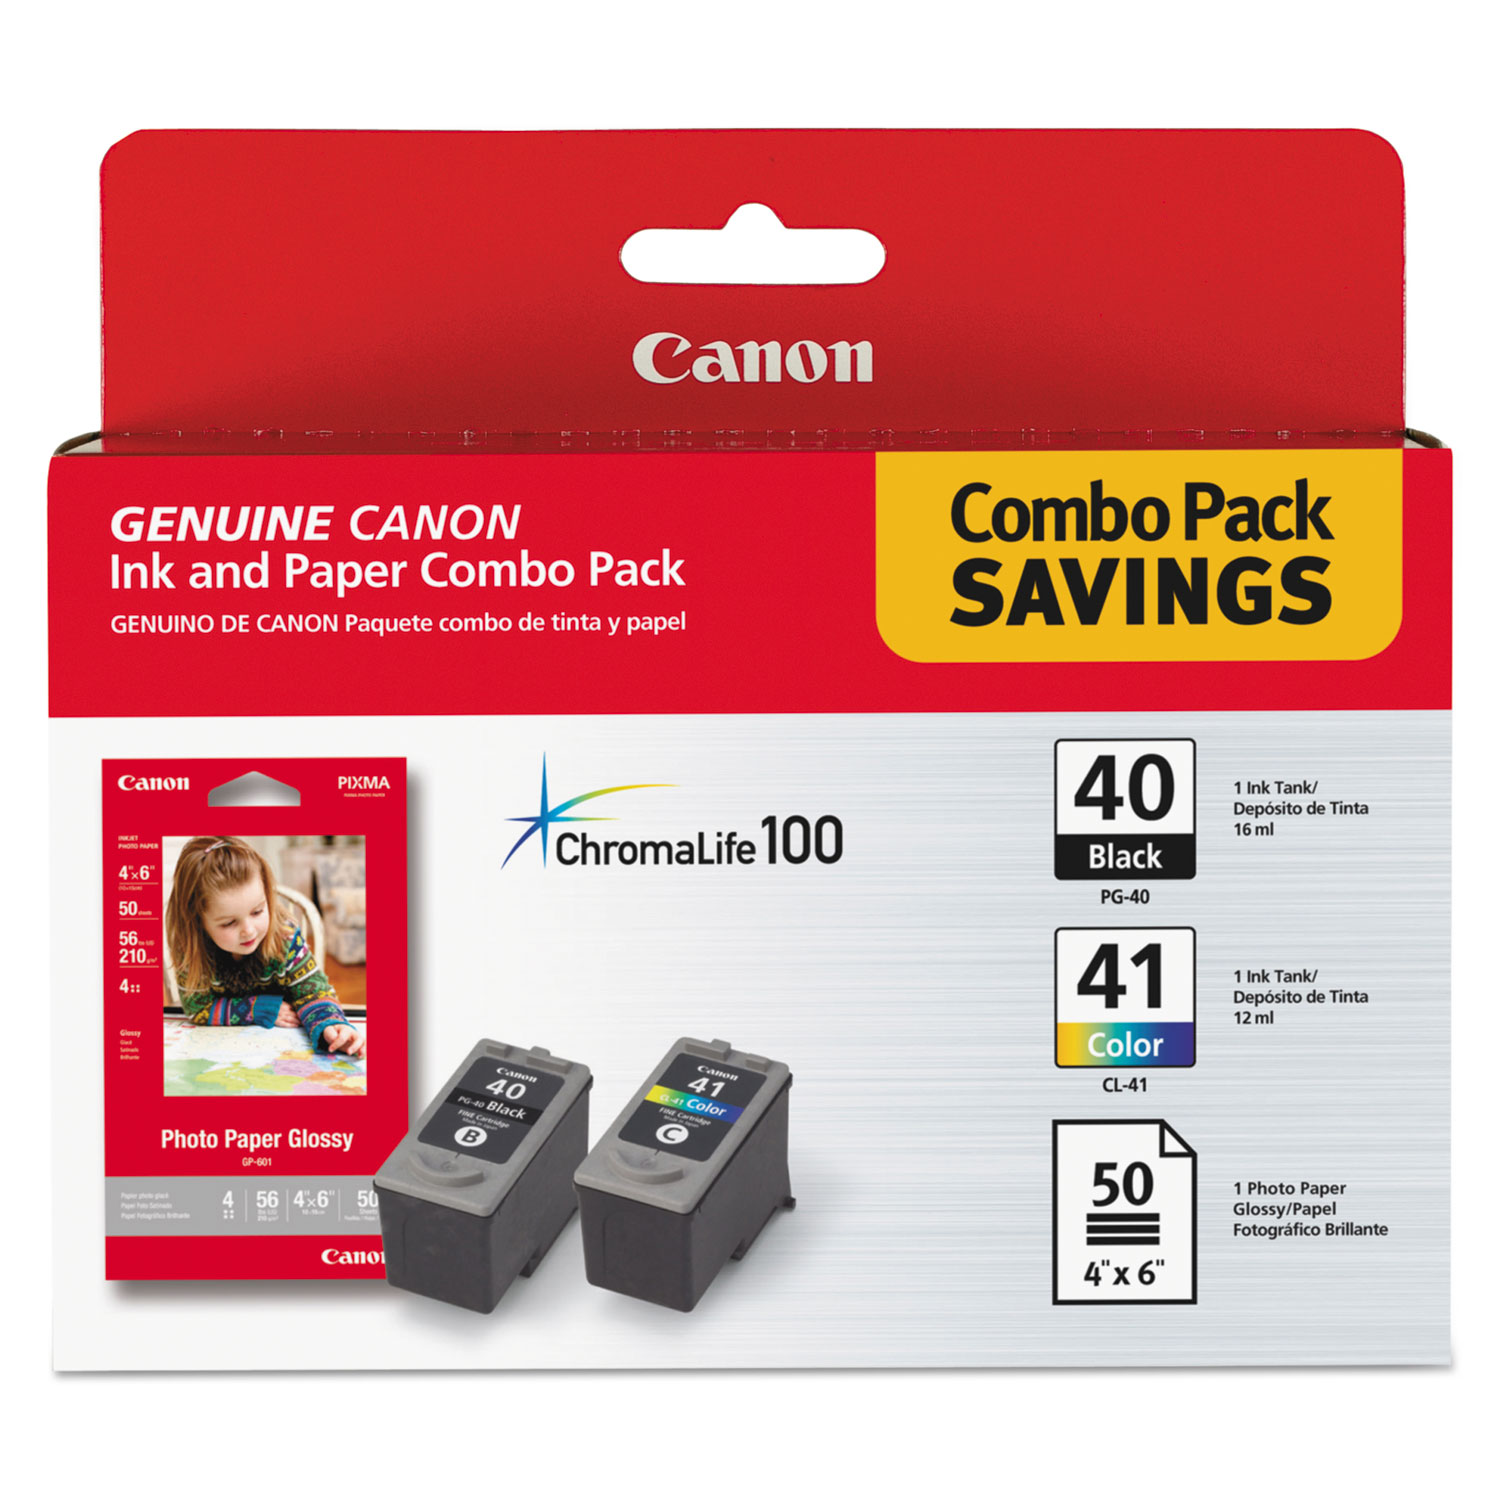 Canon PG-40/CL-41 Cartridges and Glossy Photo Paper Combo Pack - image 1 of 2